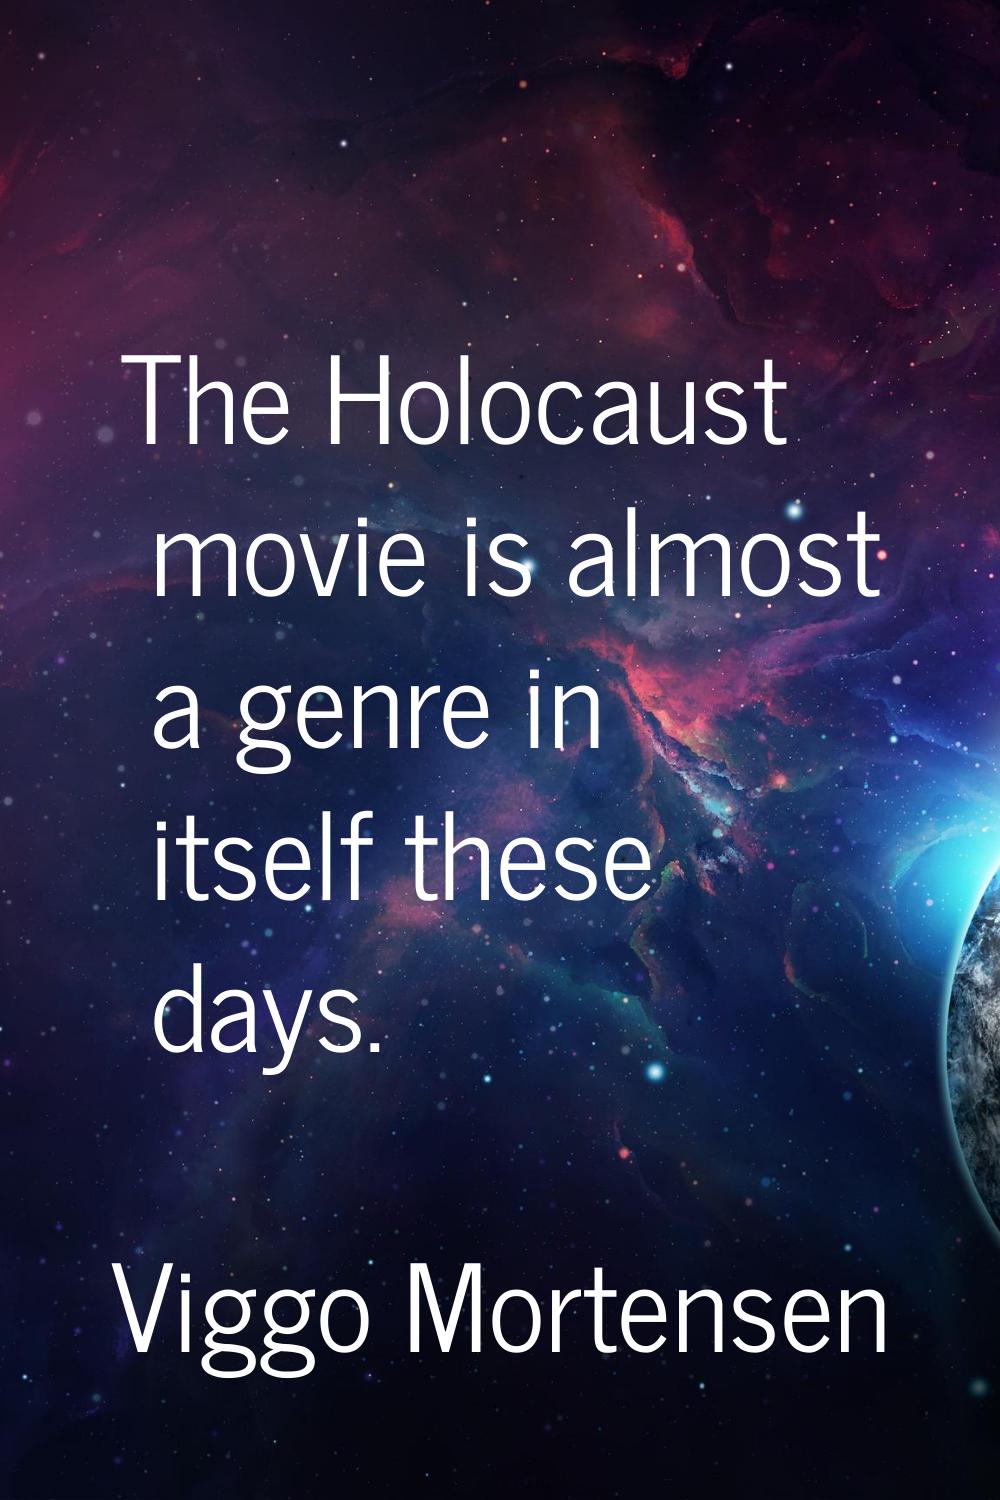 The Holocaust movie is almost a genre in itself these days.